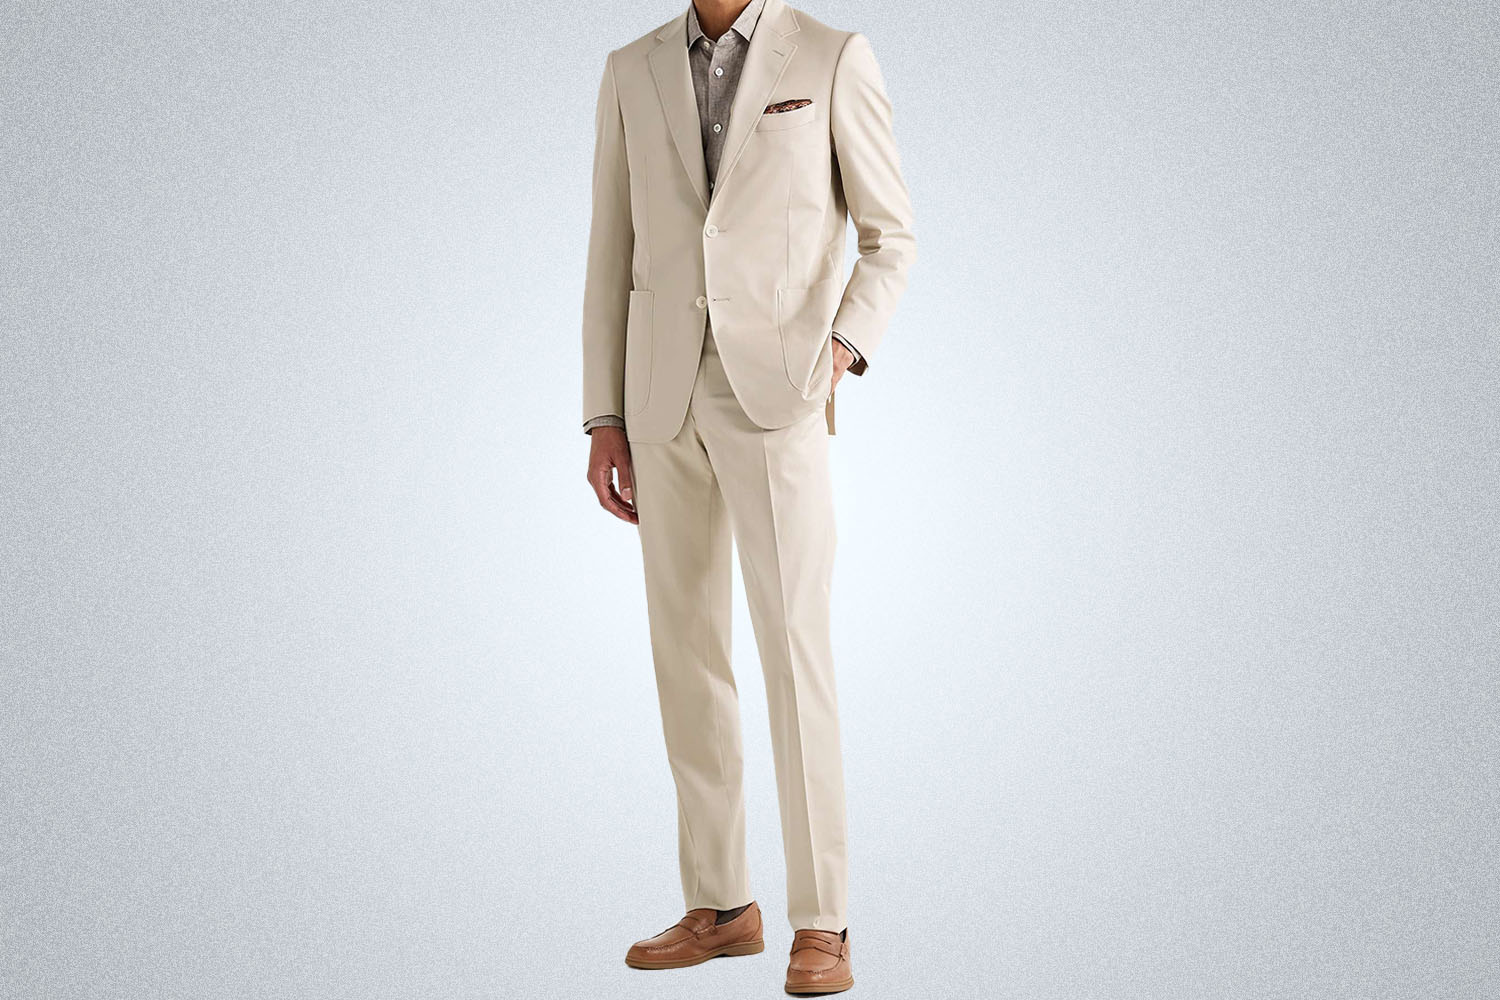 a cream colored suit on a model